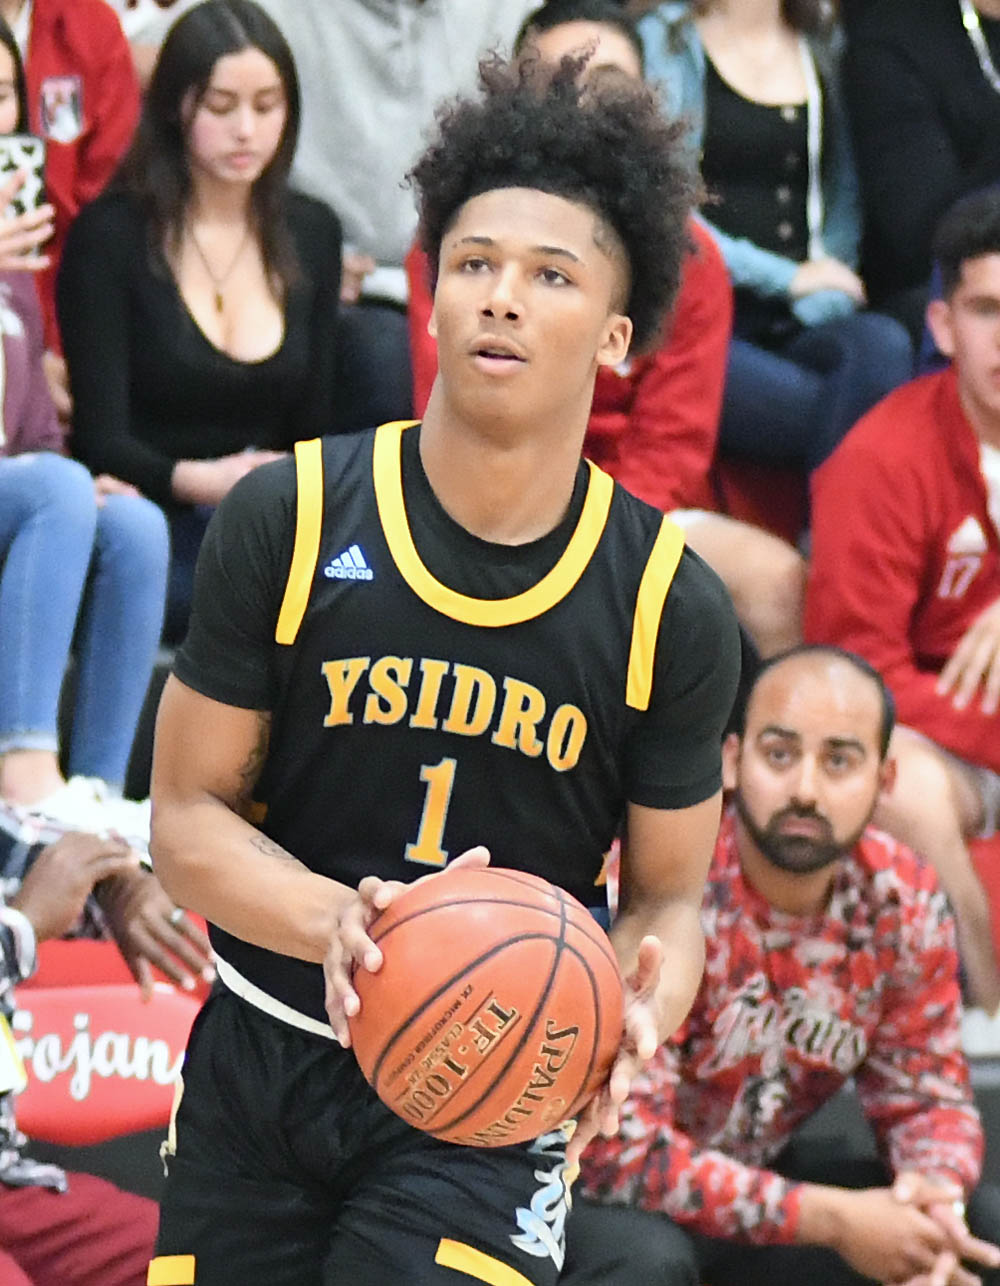 Championship Weekend Starts Early With San Ysidro Hoop Men The Star News